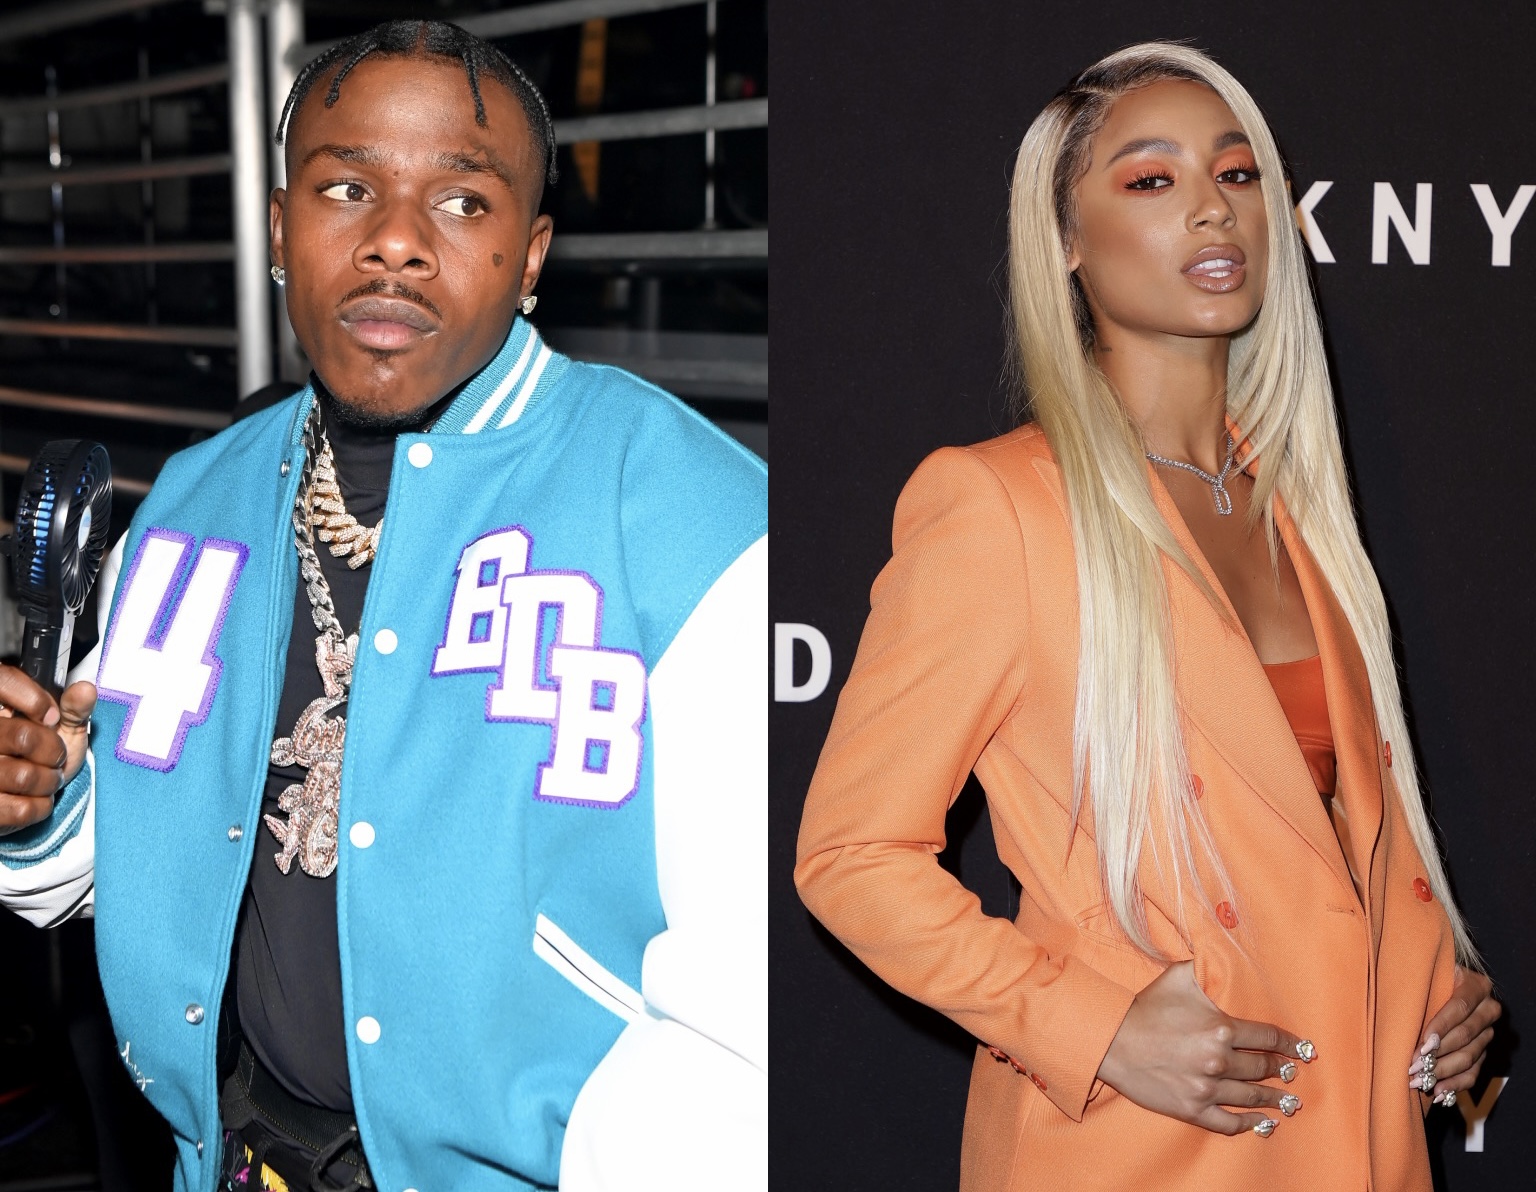 DaBaby Calls DaniLeigh “Side Bitch” While Sharing His Side Of The Story